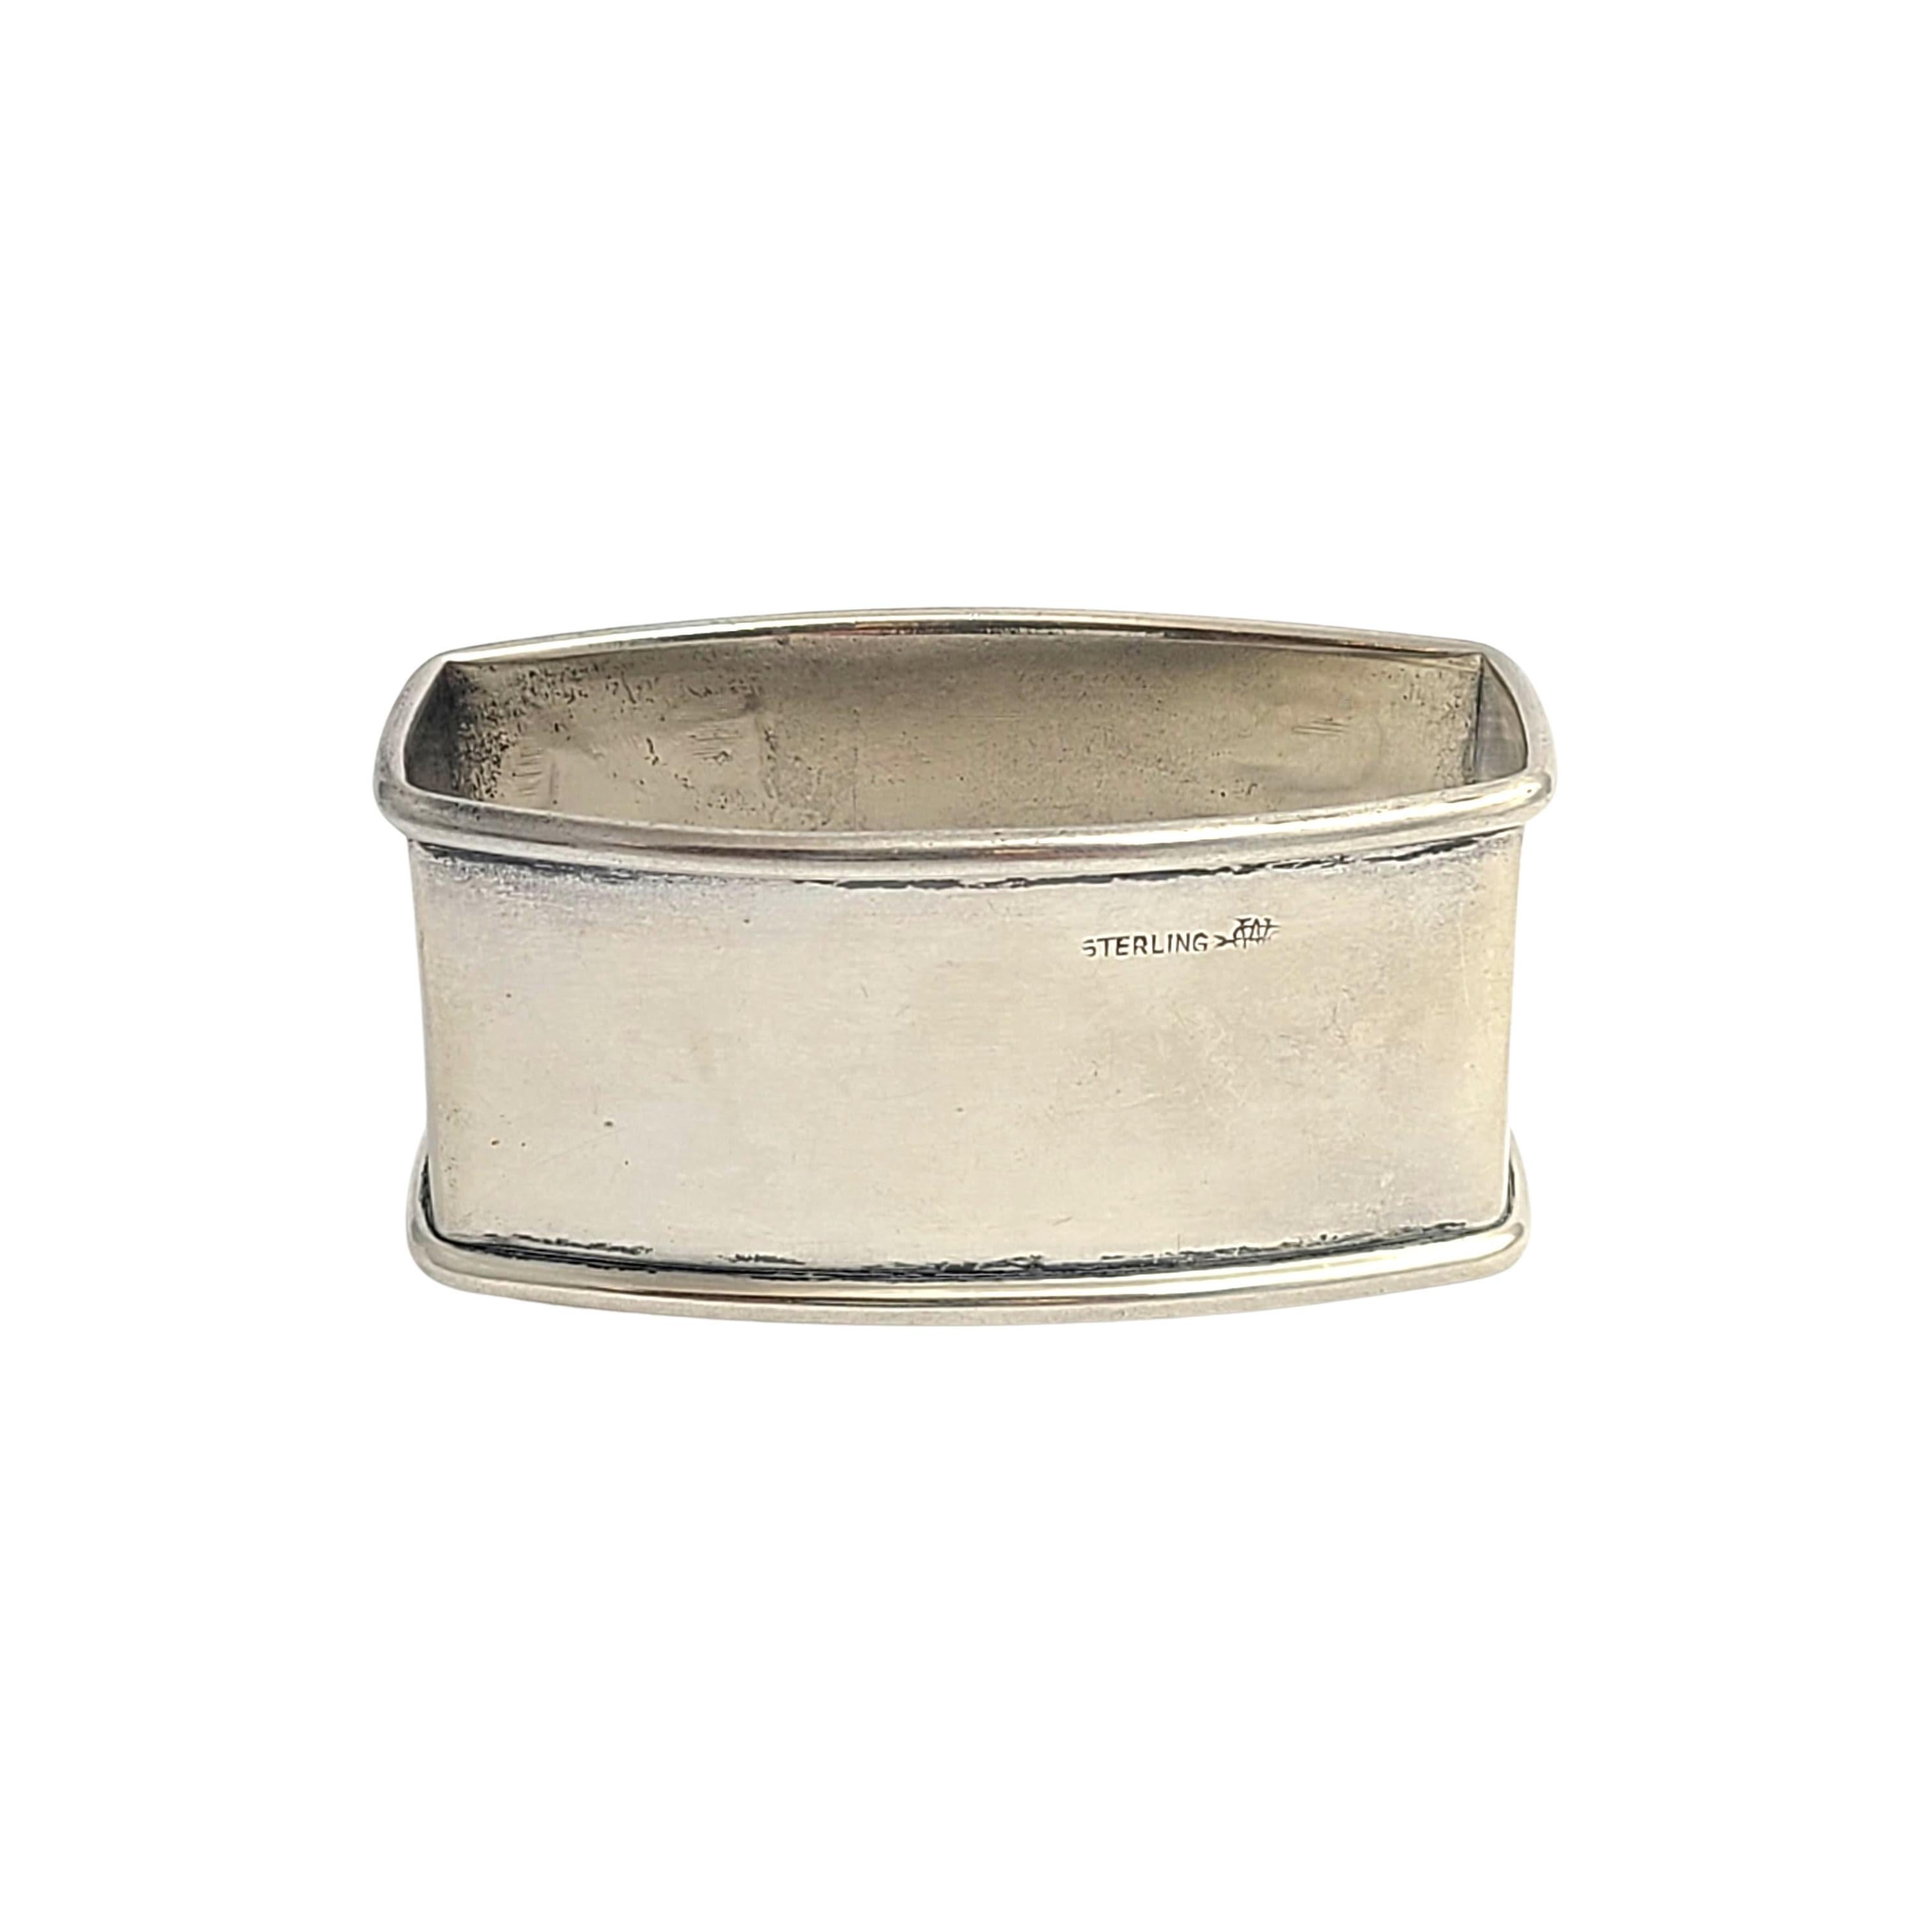 Webster Sterling Silver Enamel Child's Napkin Ring with Monogram #12342 In Good Condition For Sale In Washington Depot, CT